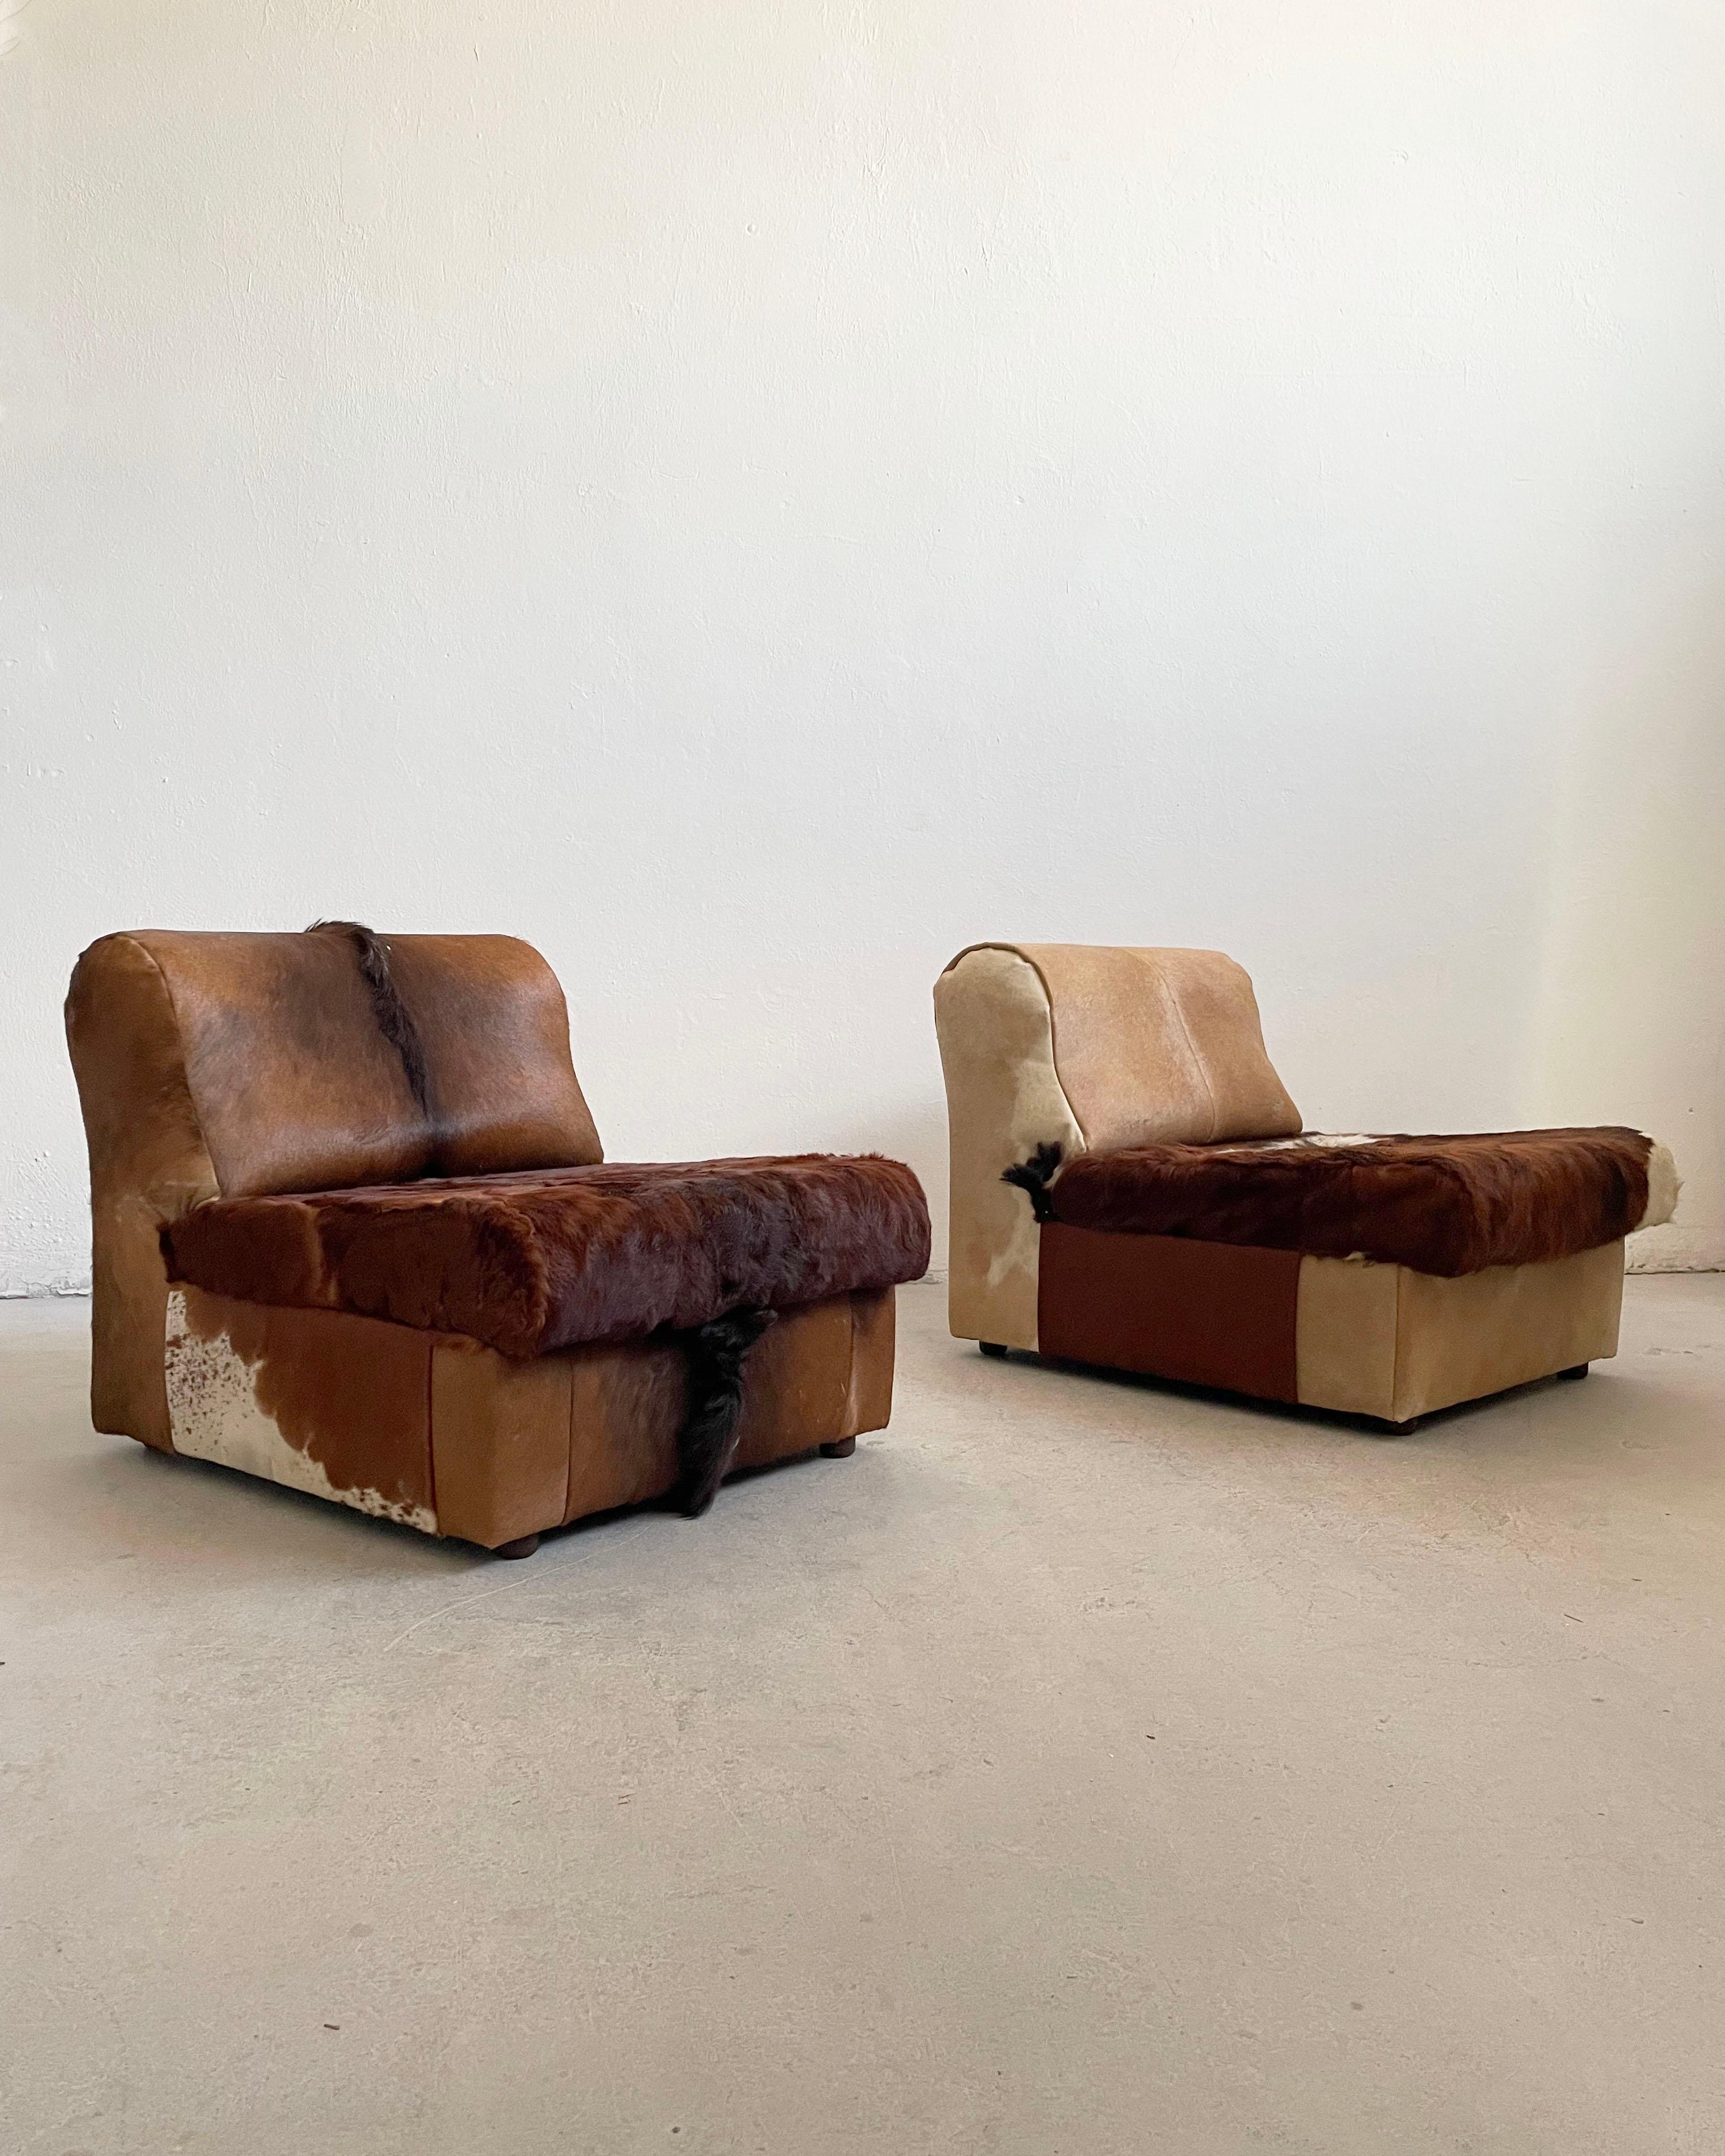 Mid-Century Modern Lounge Seating Set, Sofa + Chairs in Cow Hide, Cow Fur, 1970's For Sale